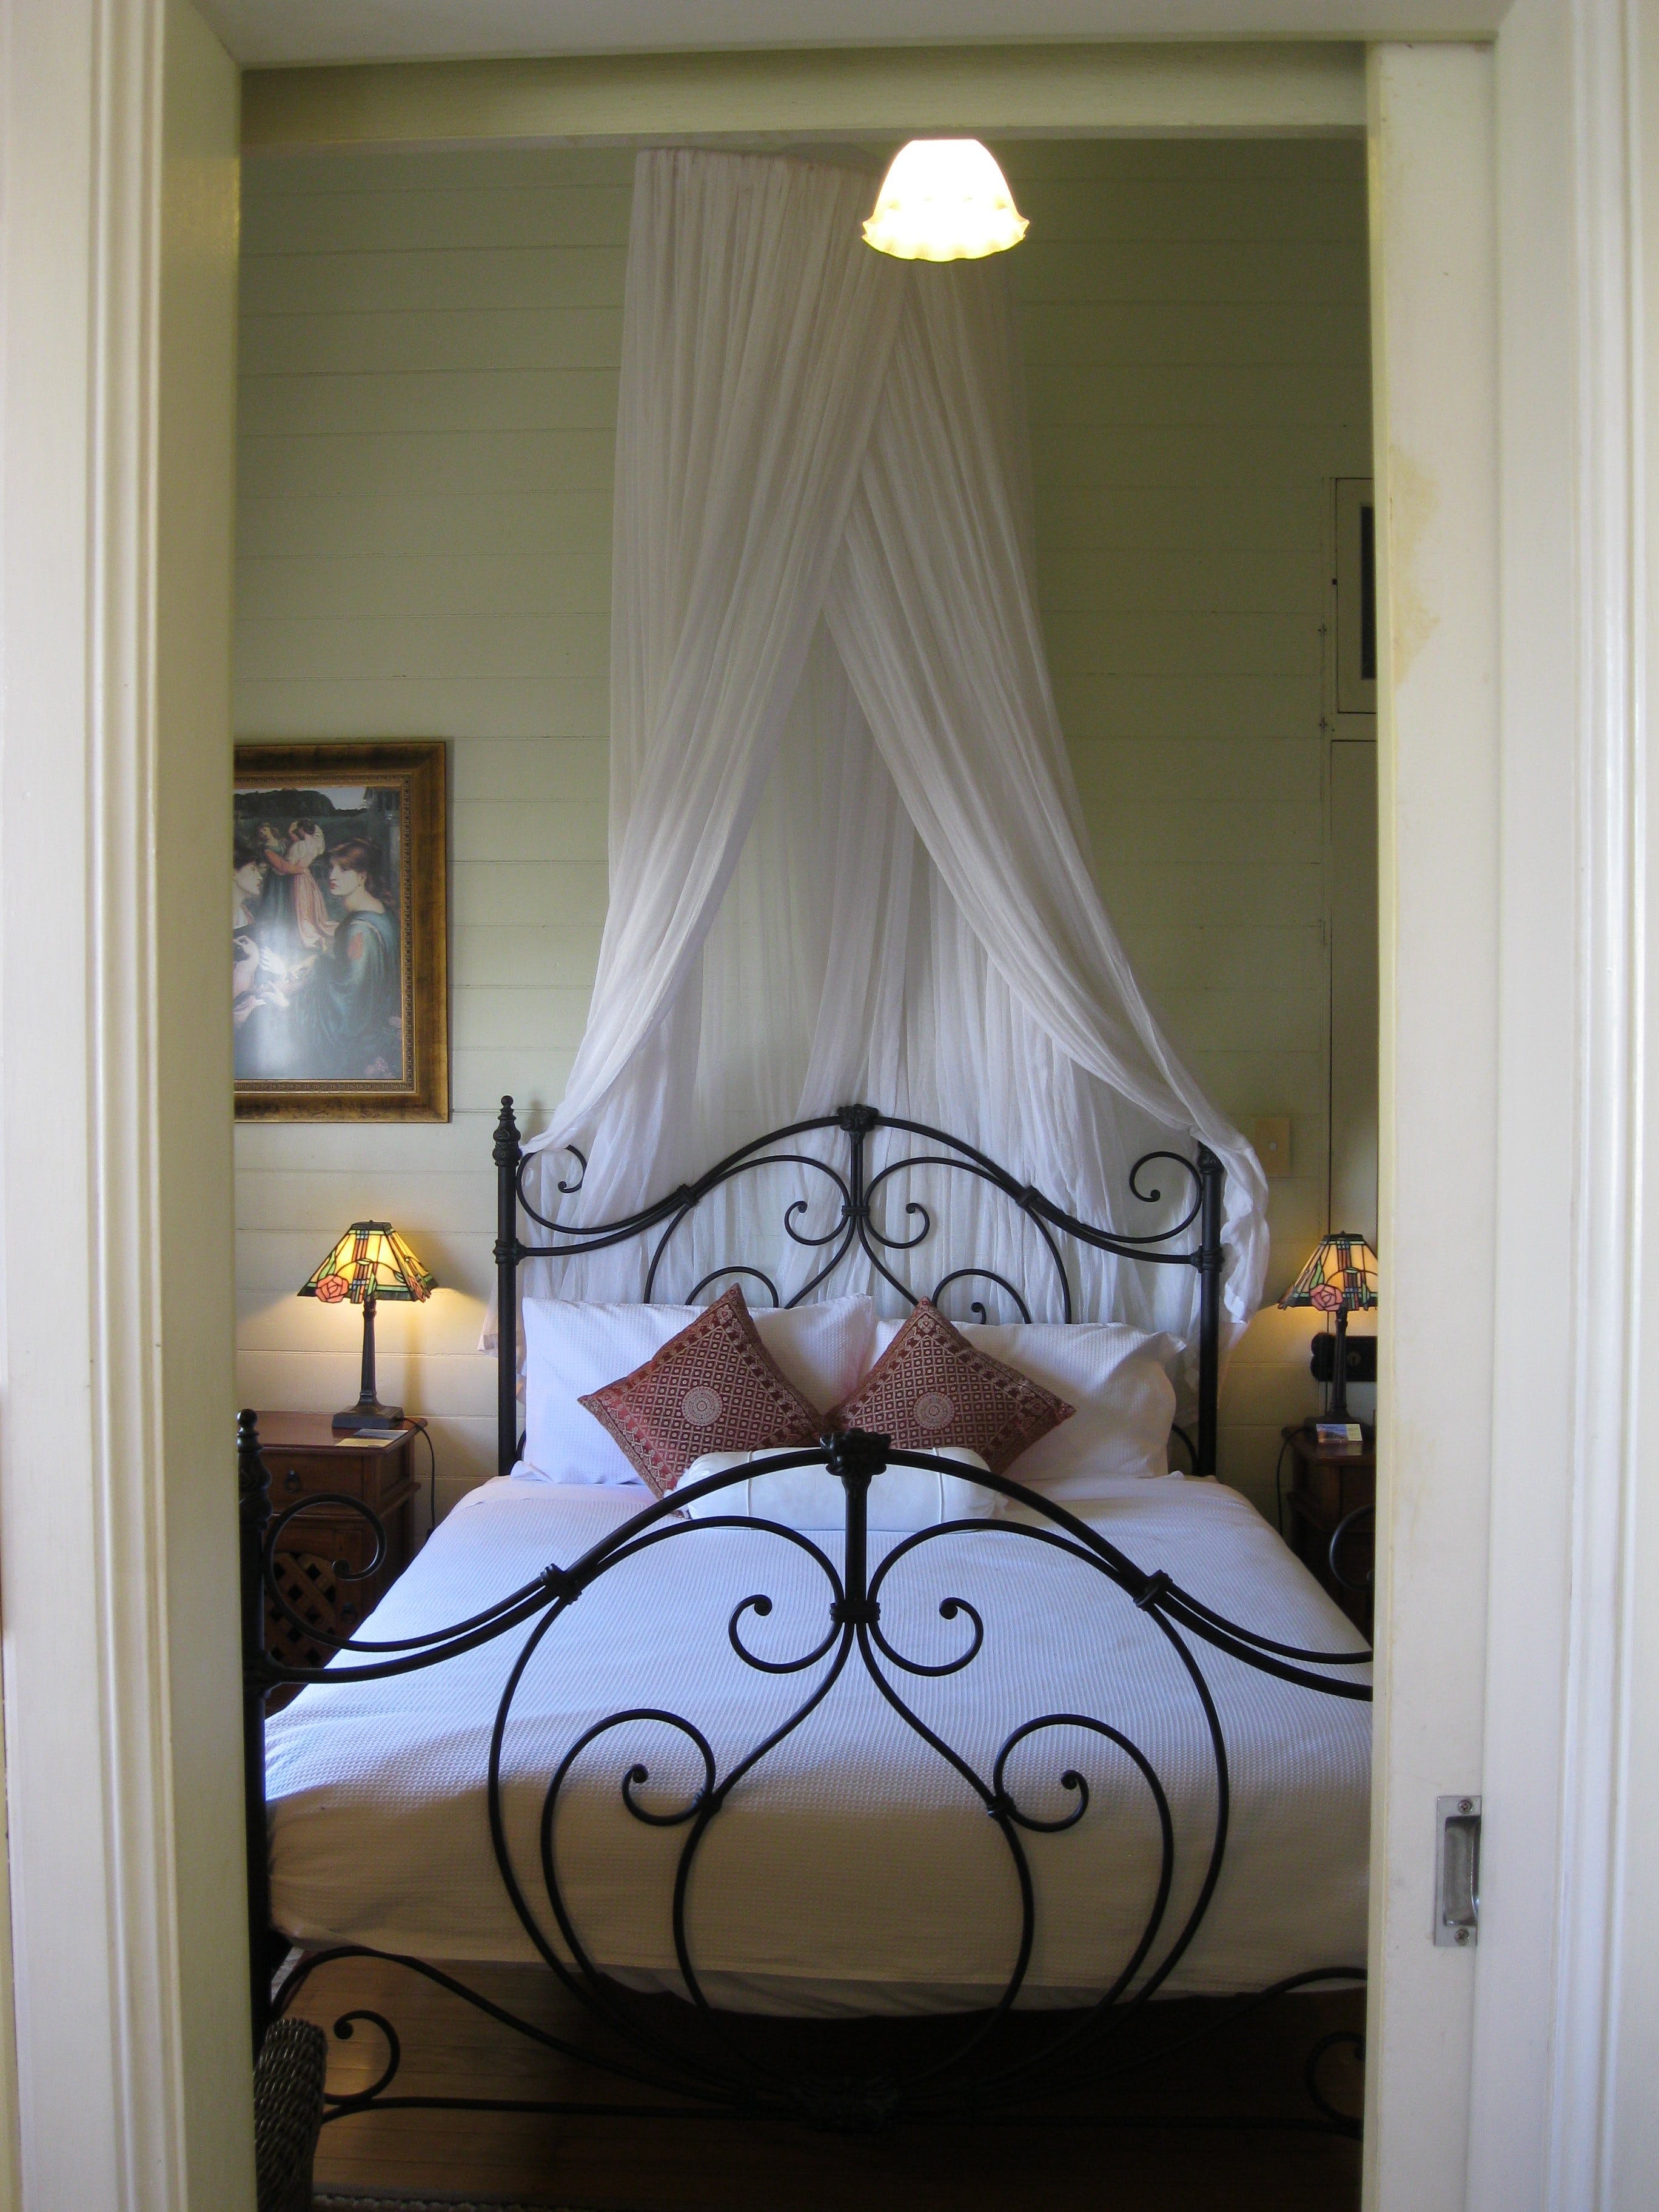 Classique Bed And Breakfast - Accommodation Bookings 1